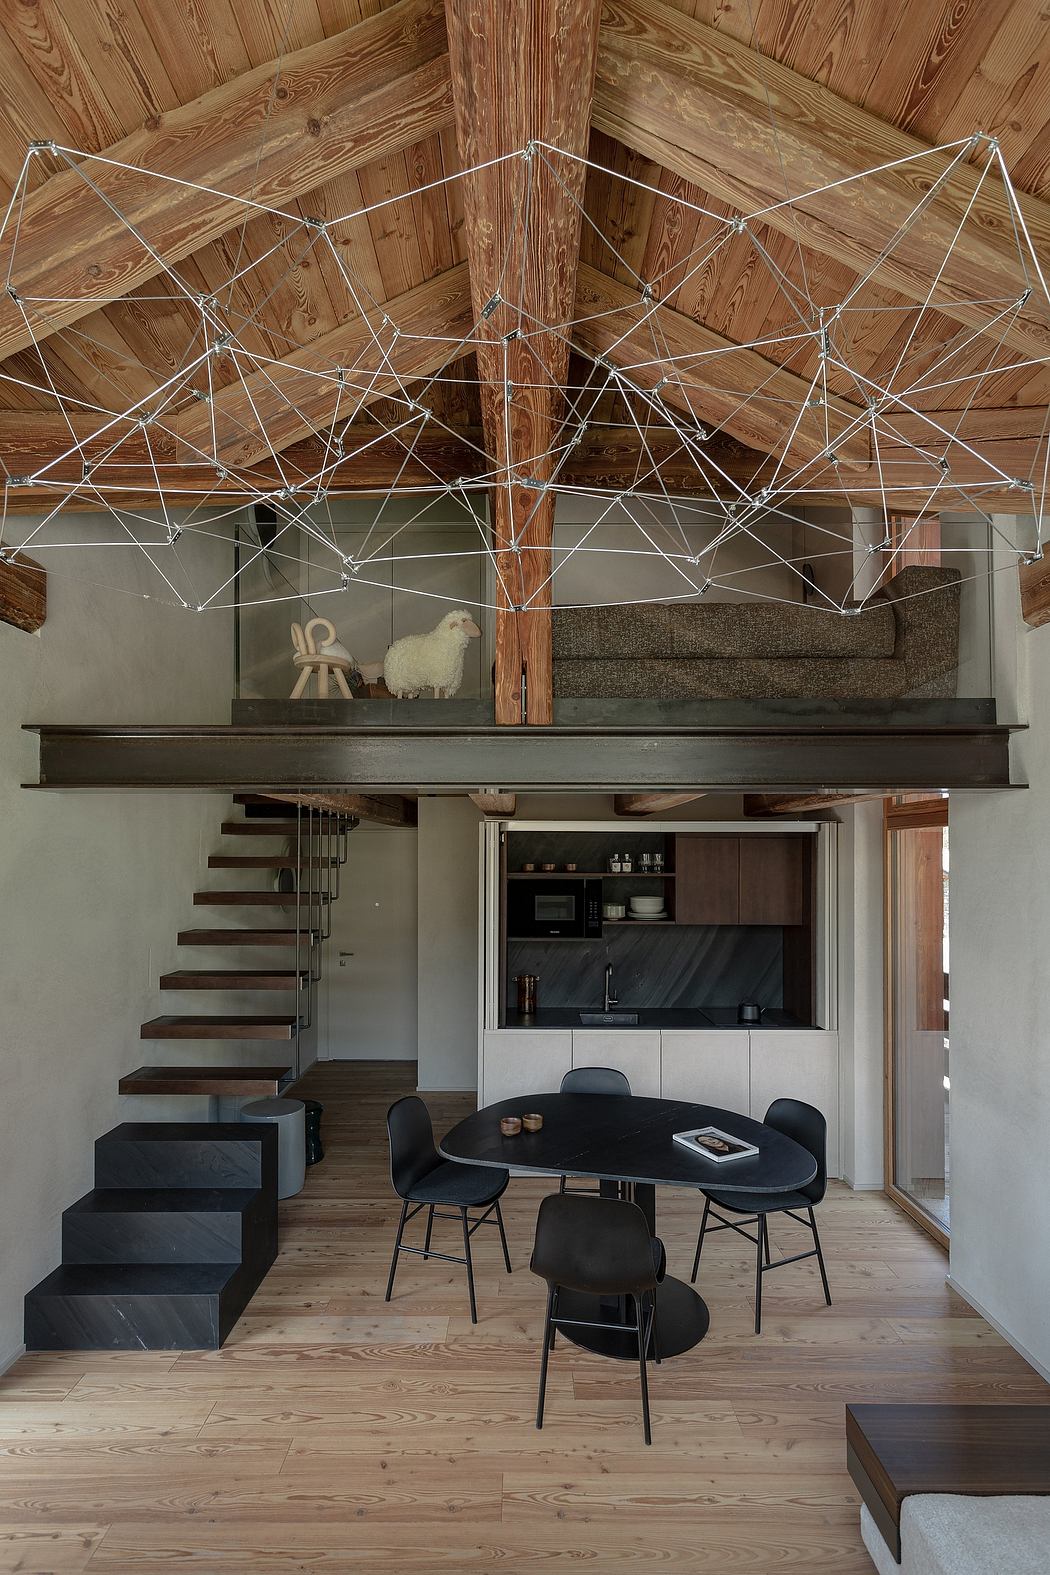 Contemporary loft space with exposed wooden beams and geometric hanging decor.